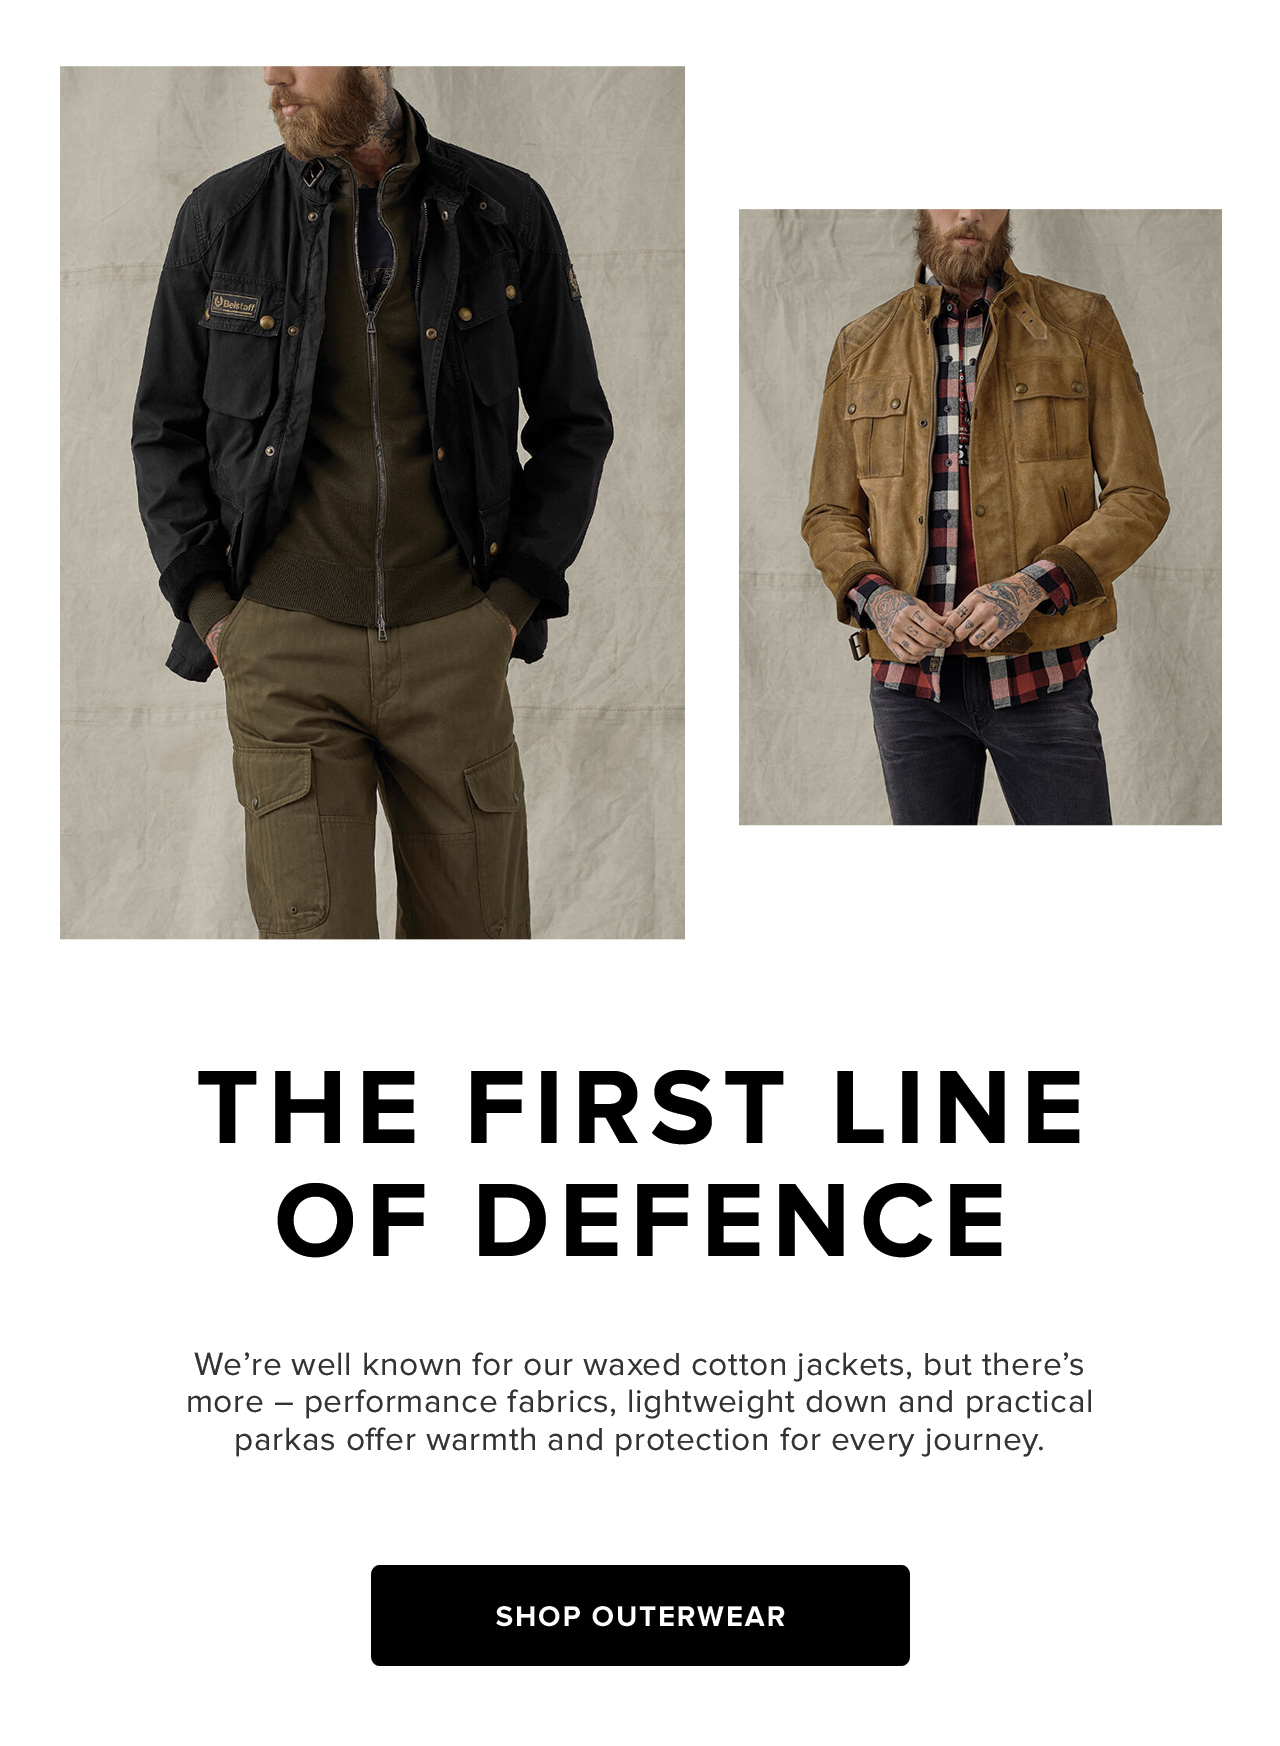 We're well known for our waxed cotton jackets, but there's more - performance fabrics, lightweight down and practical parkas offer warmth and protection for every journey.	